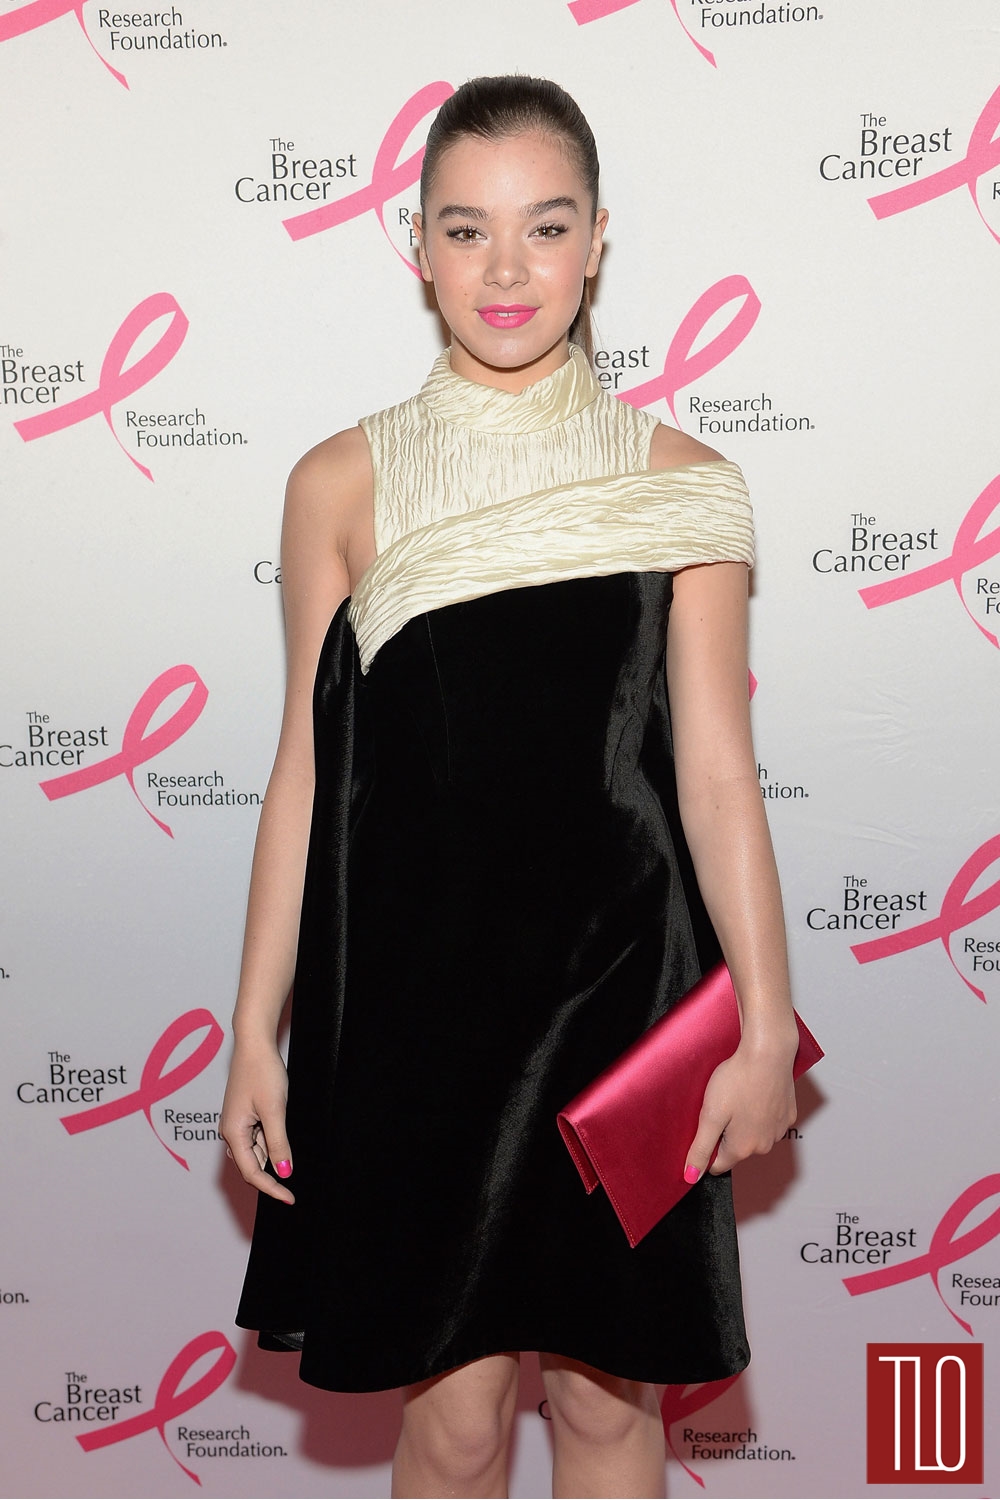 Hailee-Steinfeld-Erdem-Breast-Cancer-Research-Foundation-Pink-Party-Tom-Lorenzo-Site-TLO (1)